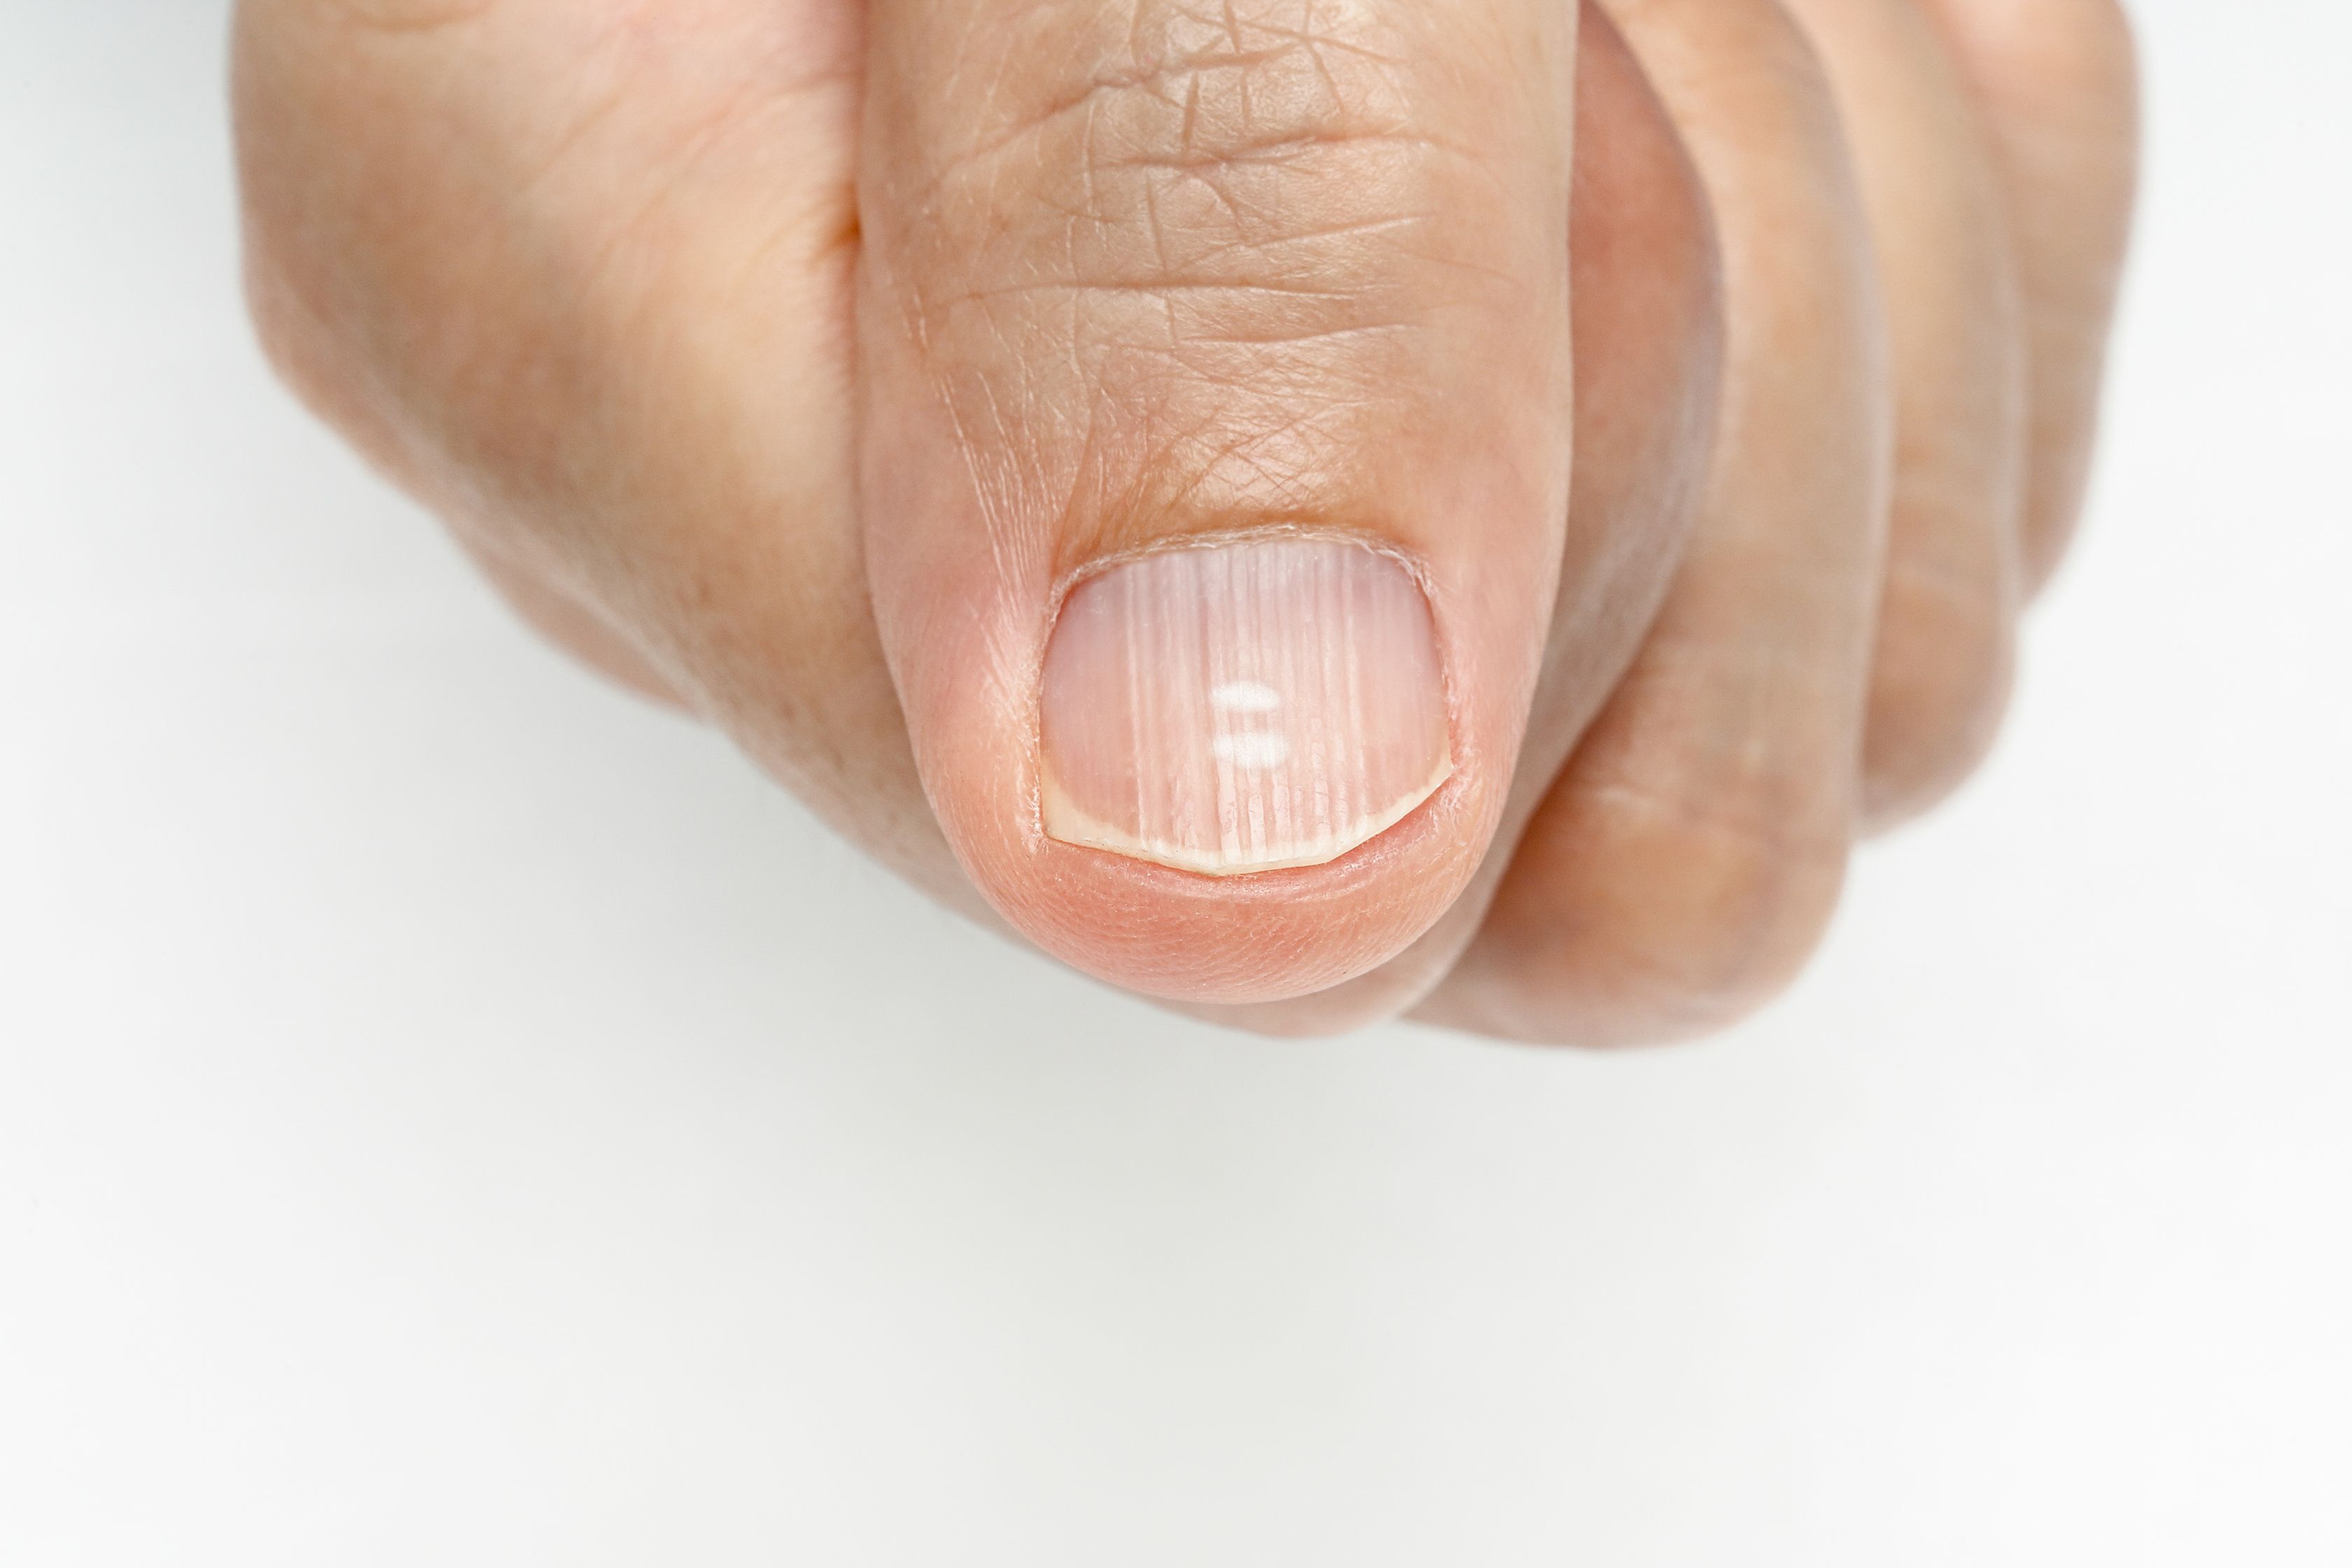 What Causes Dry & Cracked Skin Around the Fingernails? | Healthfully